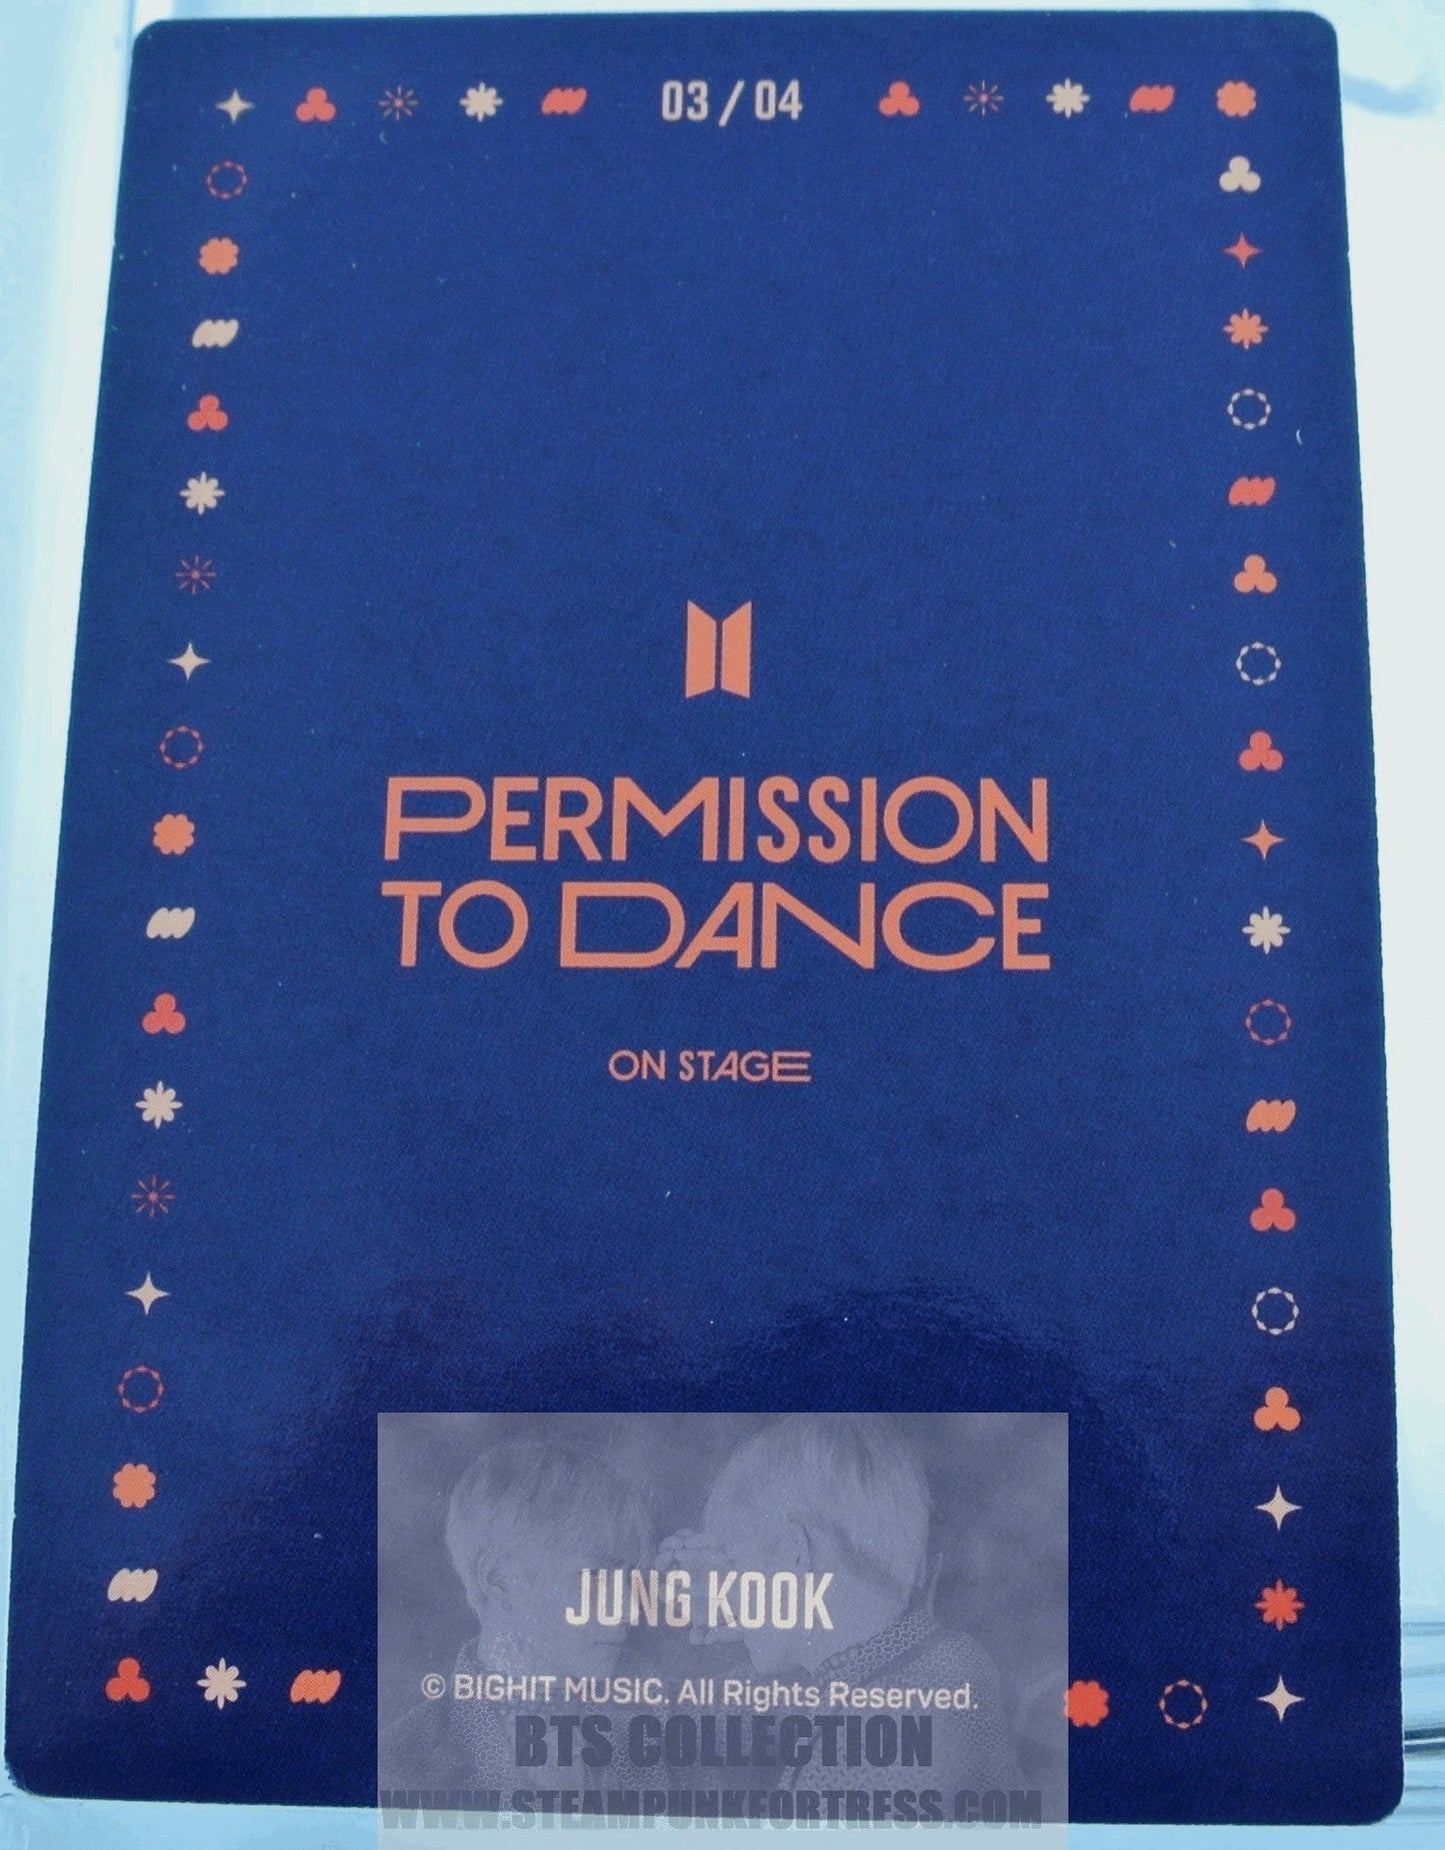 BTS JUNGKOOK JEON JUNG-KOOK PTD 2022 PERMISSION TO DANCE ON STAGE SEOUL PHOTOCARD PHOTO CARD PC #3 OF 4 NEW OFFICIAL MERCHANDISE